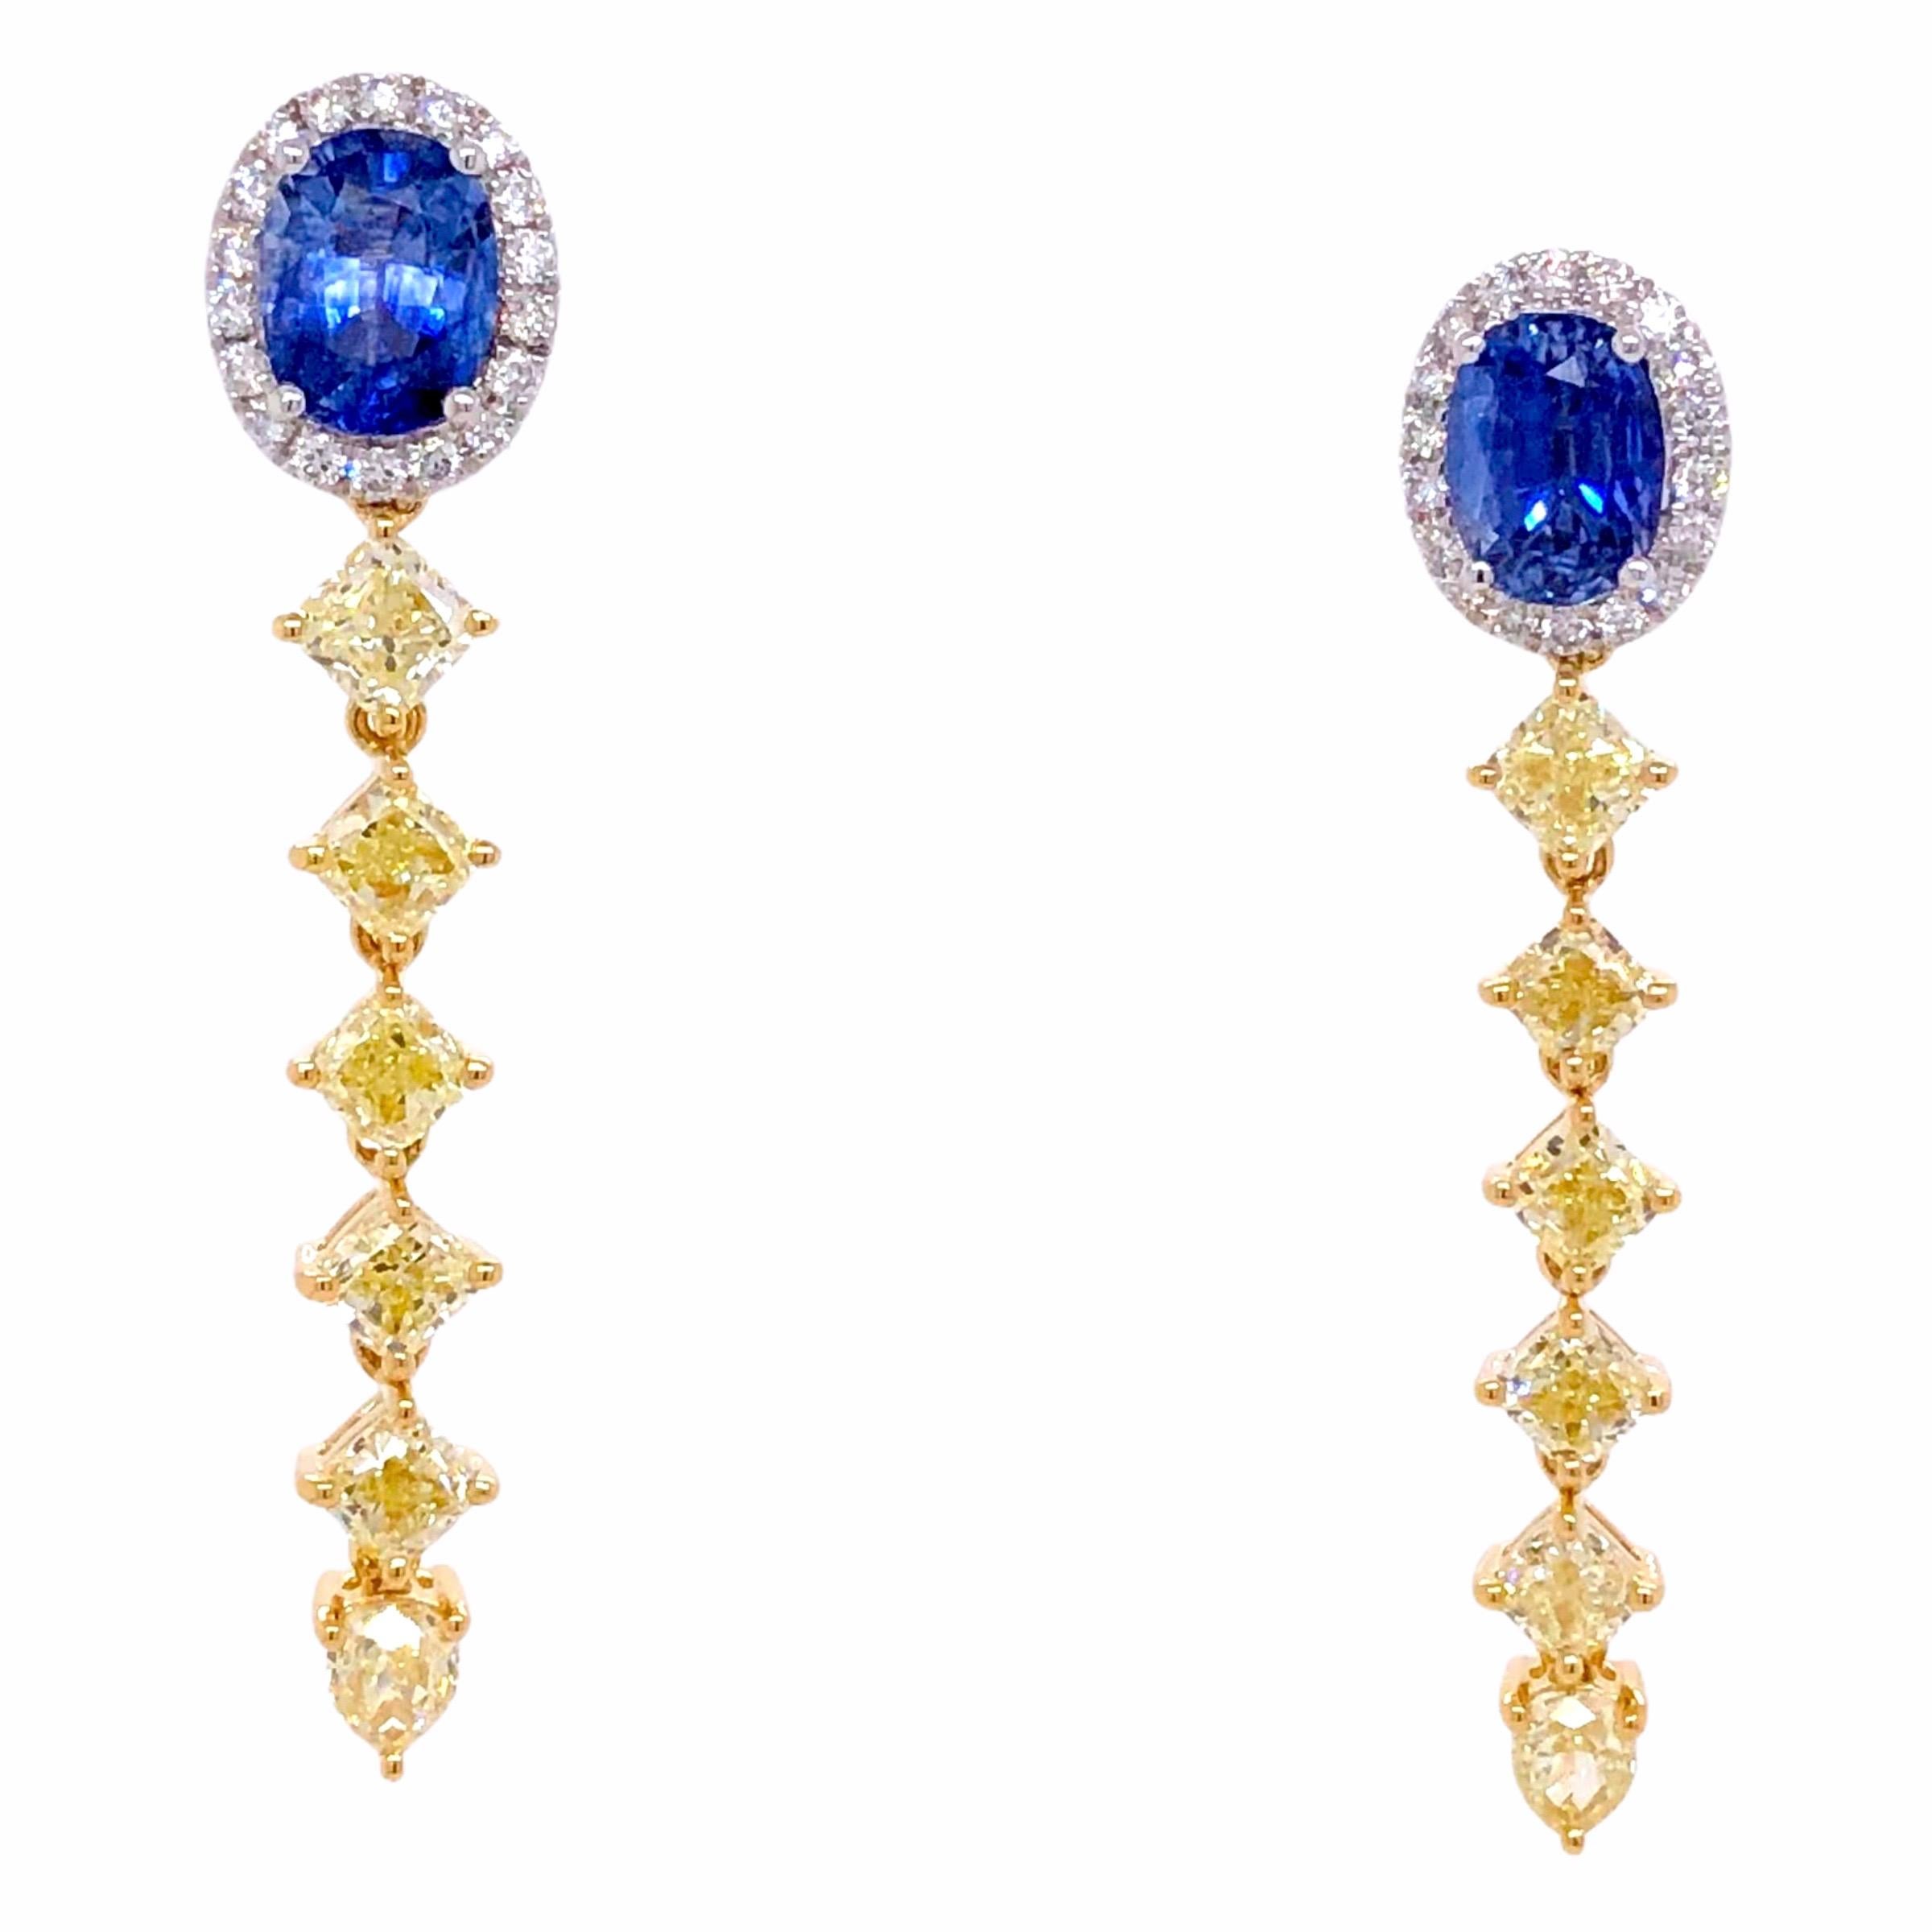 Victorian Paris Craft House 2.01ct Blue Sapphire Yellow Diamond Earrings in 18 Karat Gold For Sale